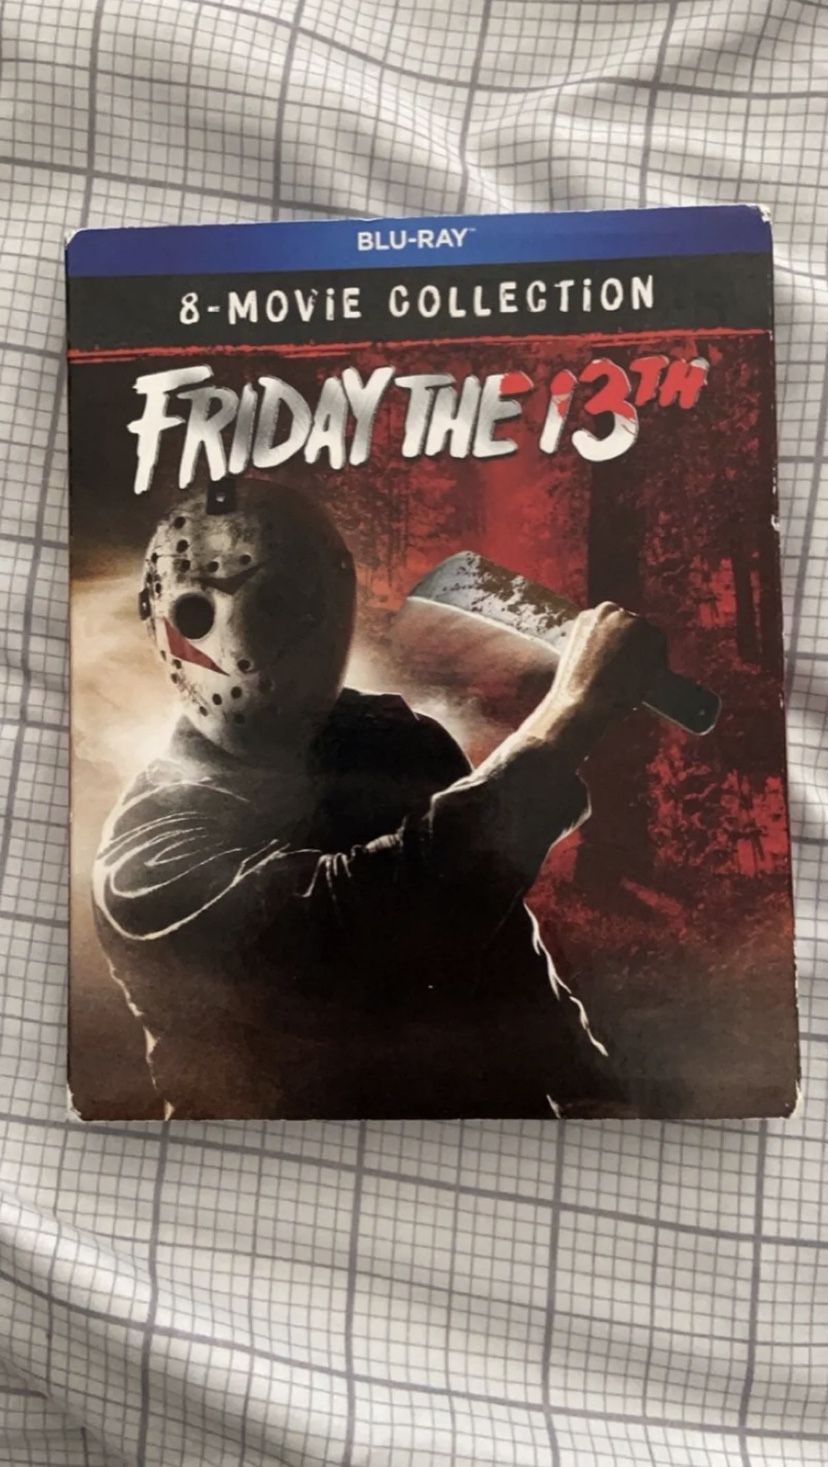 Friday the 13th movie collection